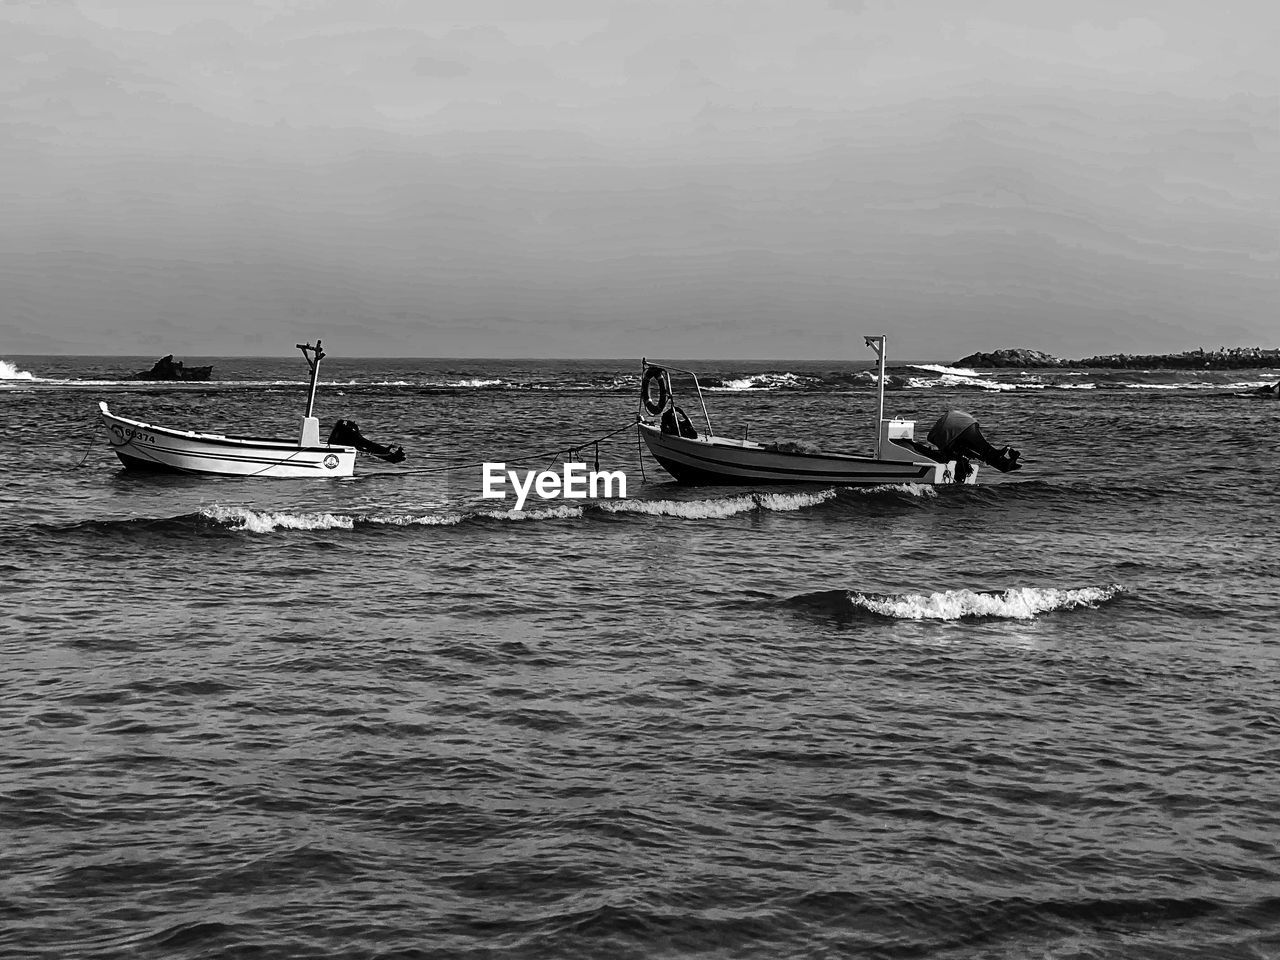 water, nautical vessel, transportation, sea, mode of transportation, black and white, monochrome photography, nature, monochrome, sky, boat, men, waterfront, vehicle, day, travel, group of people, scenics - nature, occupation, beauty in nature, outdoors, boating, watercraft, wave, coast, fisherman, ship, beach, tranquility, lifestyles, sailing, tranquil scene, horizon over water